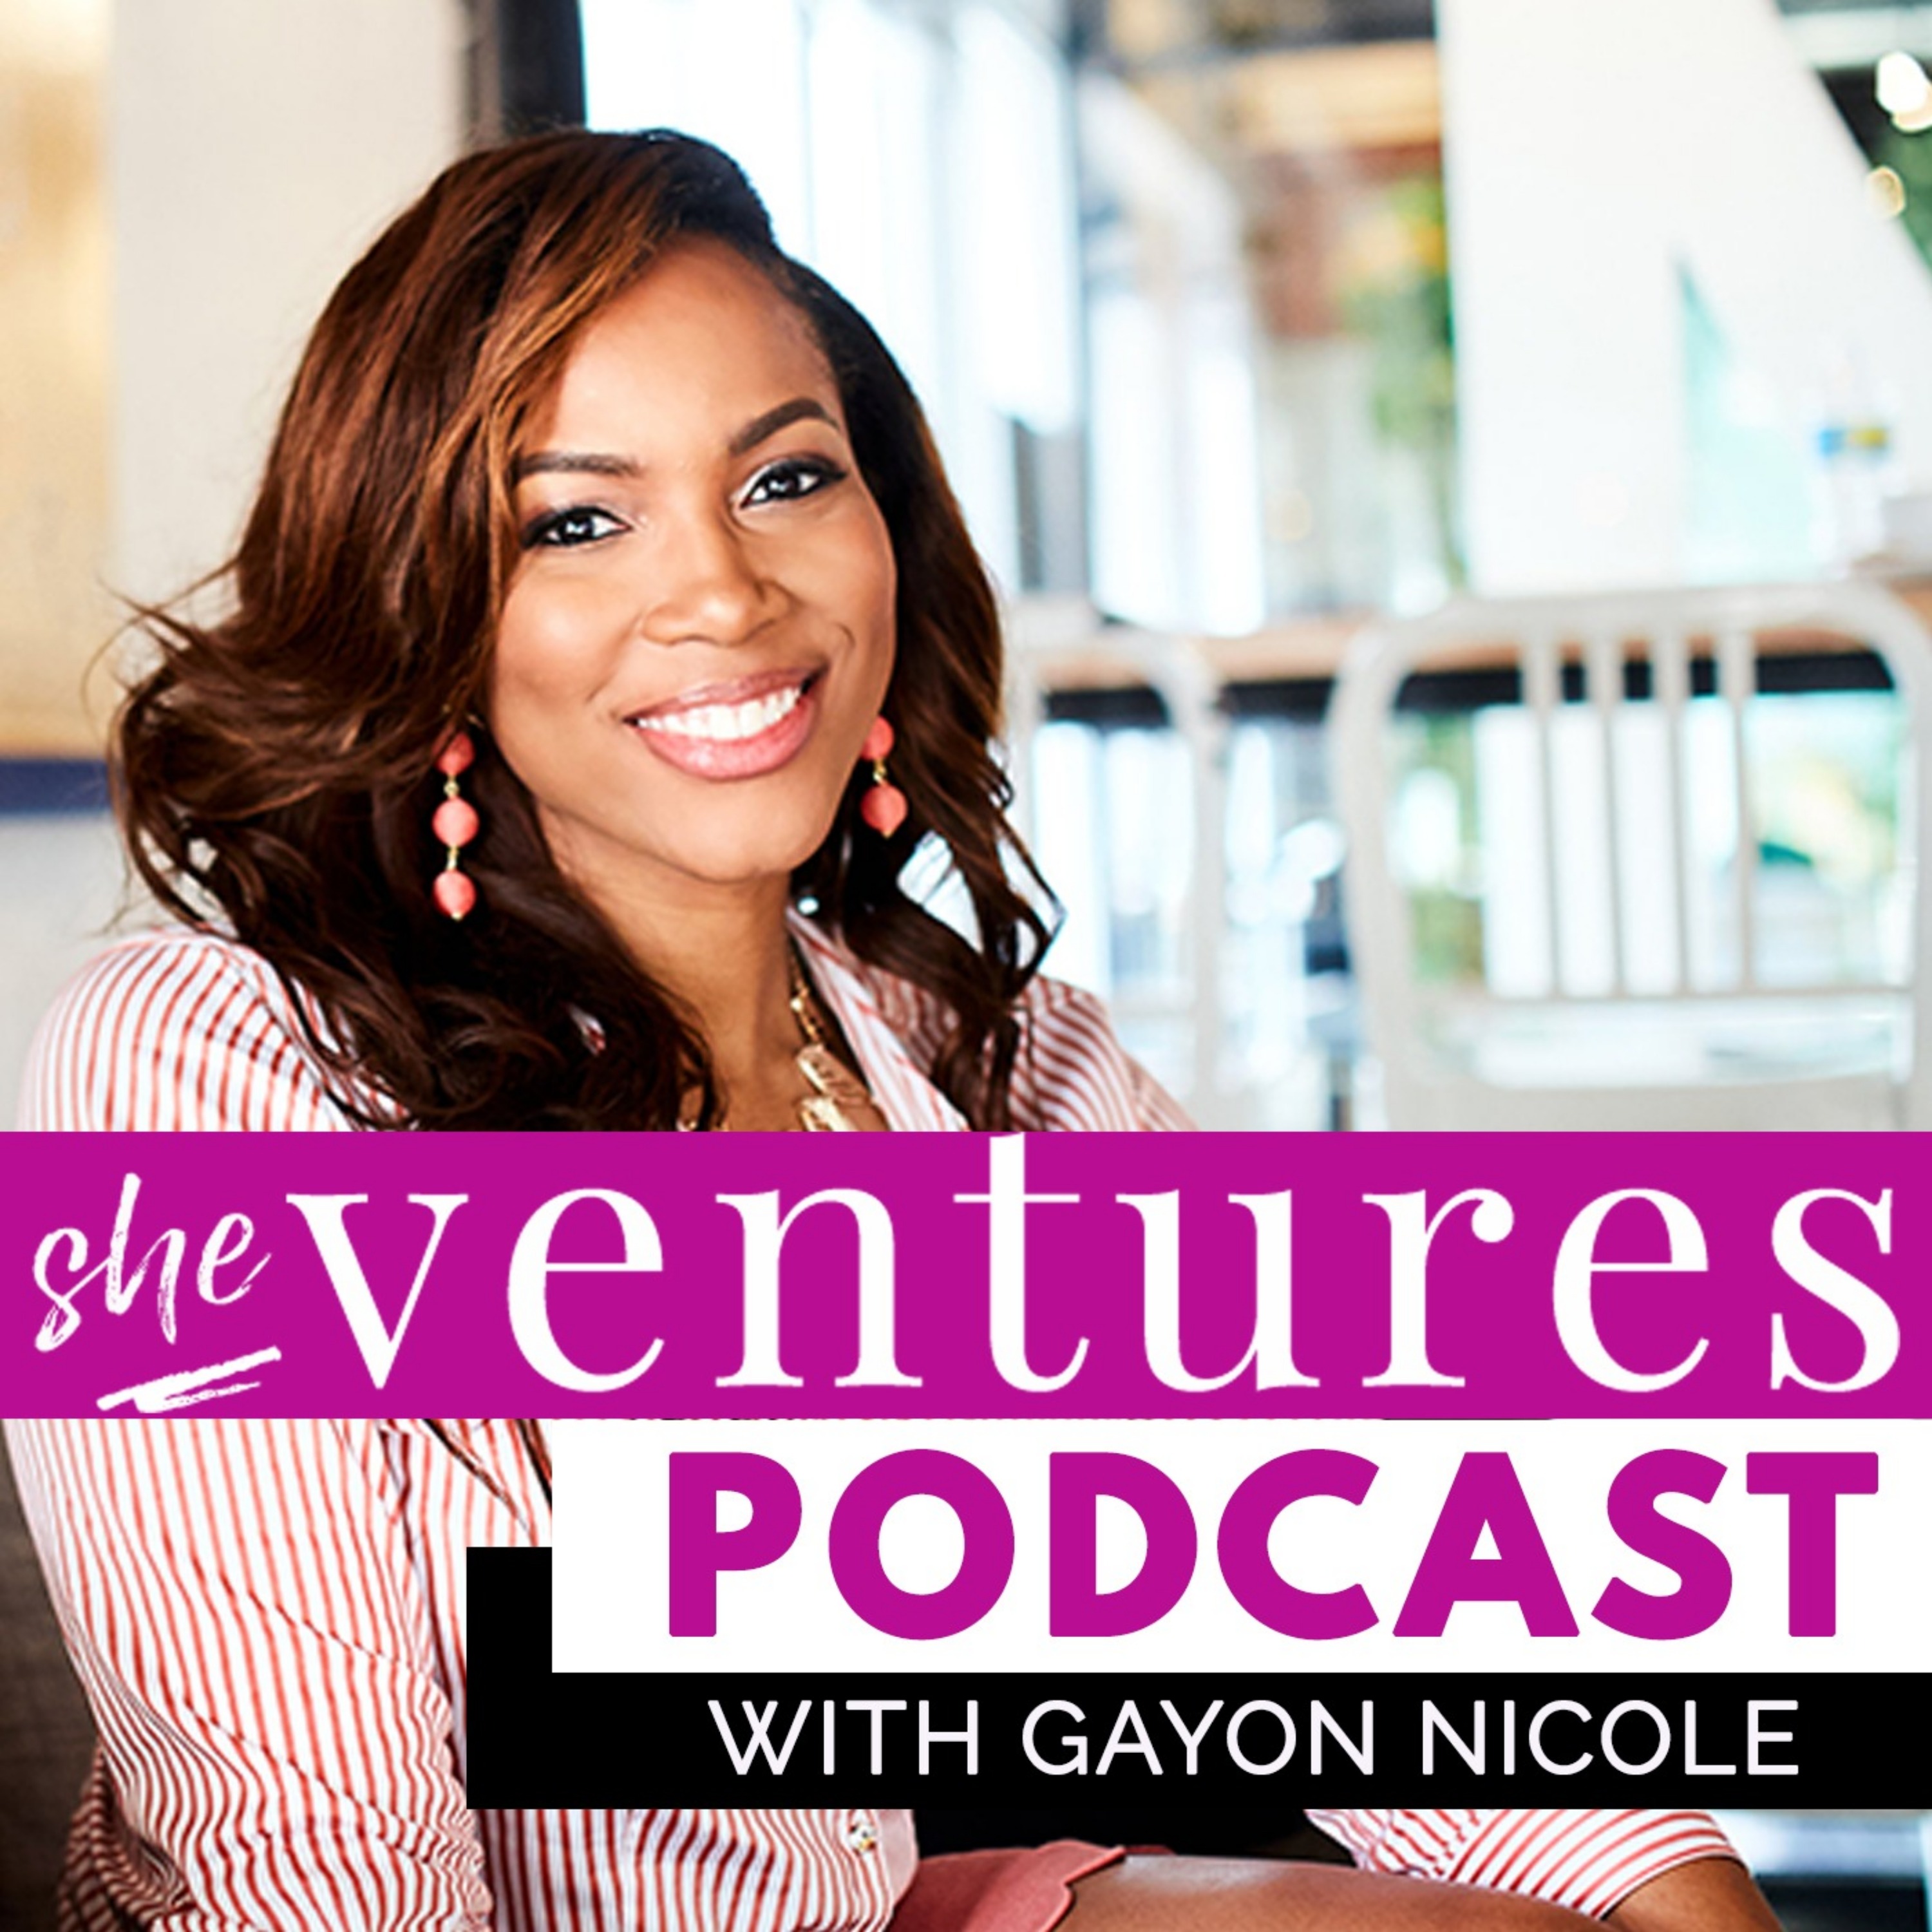 She Ventures Podcast